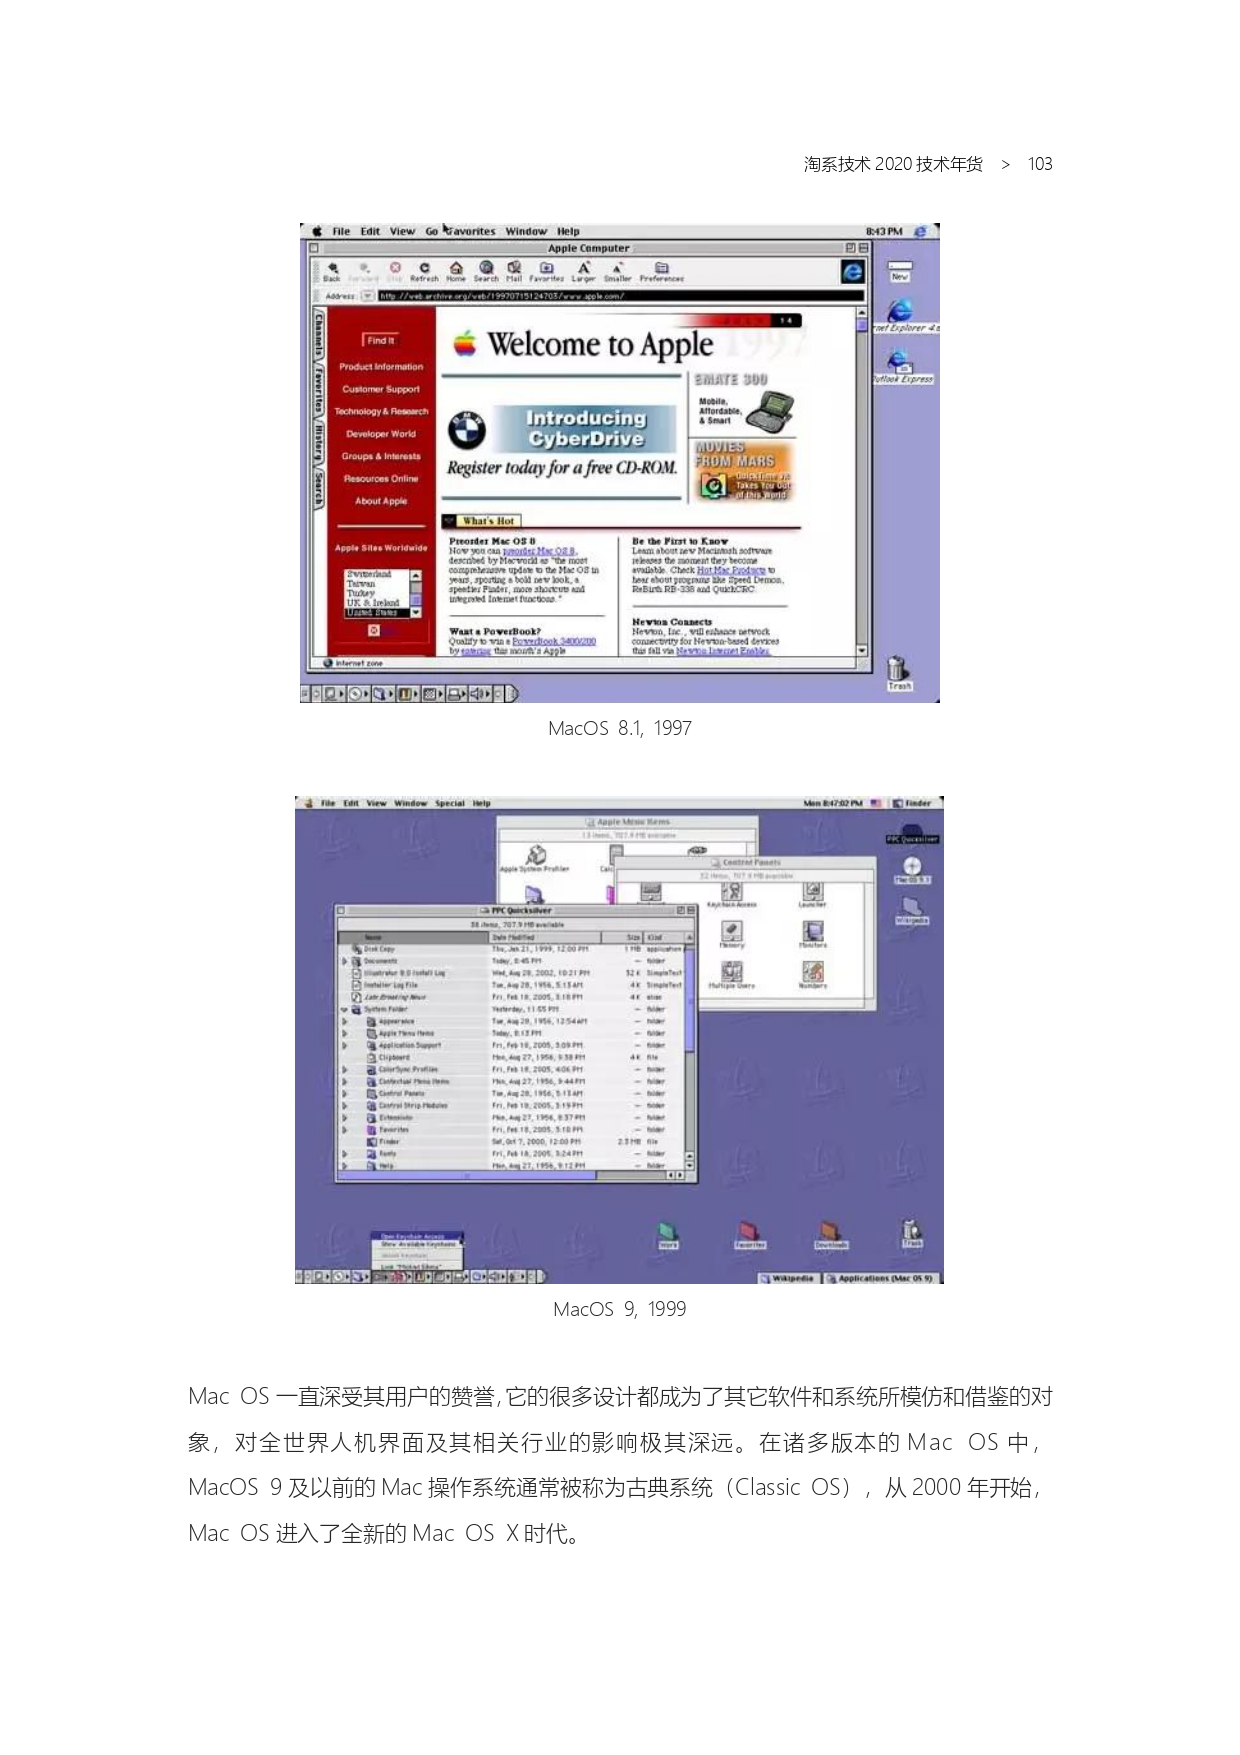 The Complete Works of Tao Technology 2020-1-570_page-0103.jpg